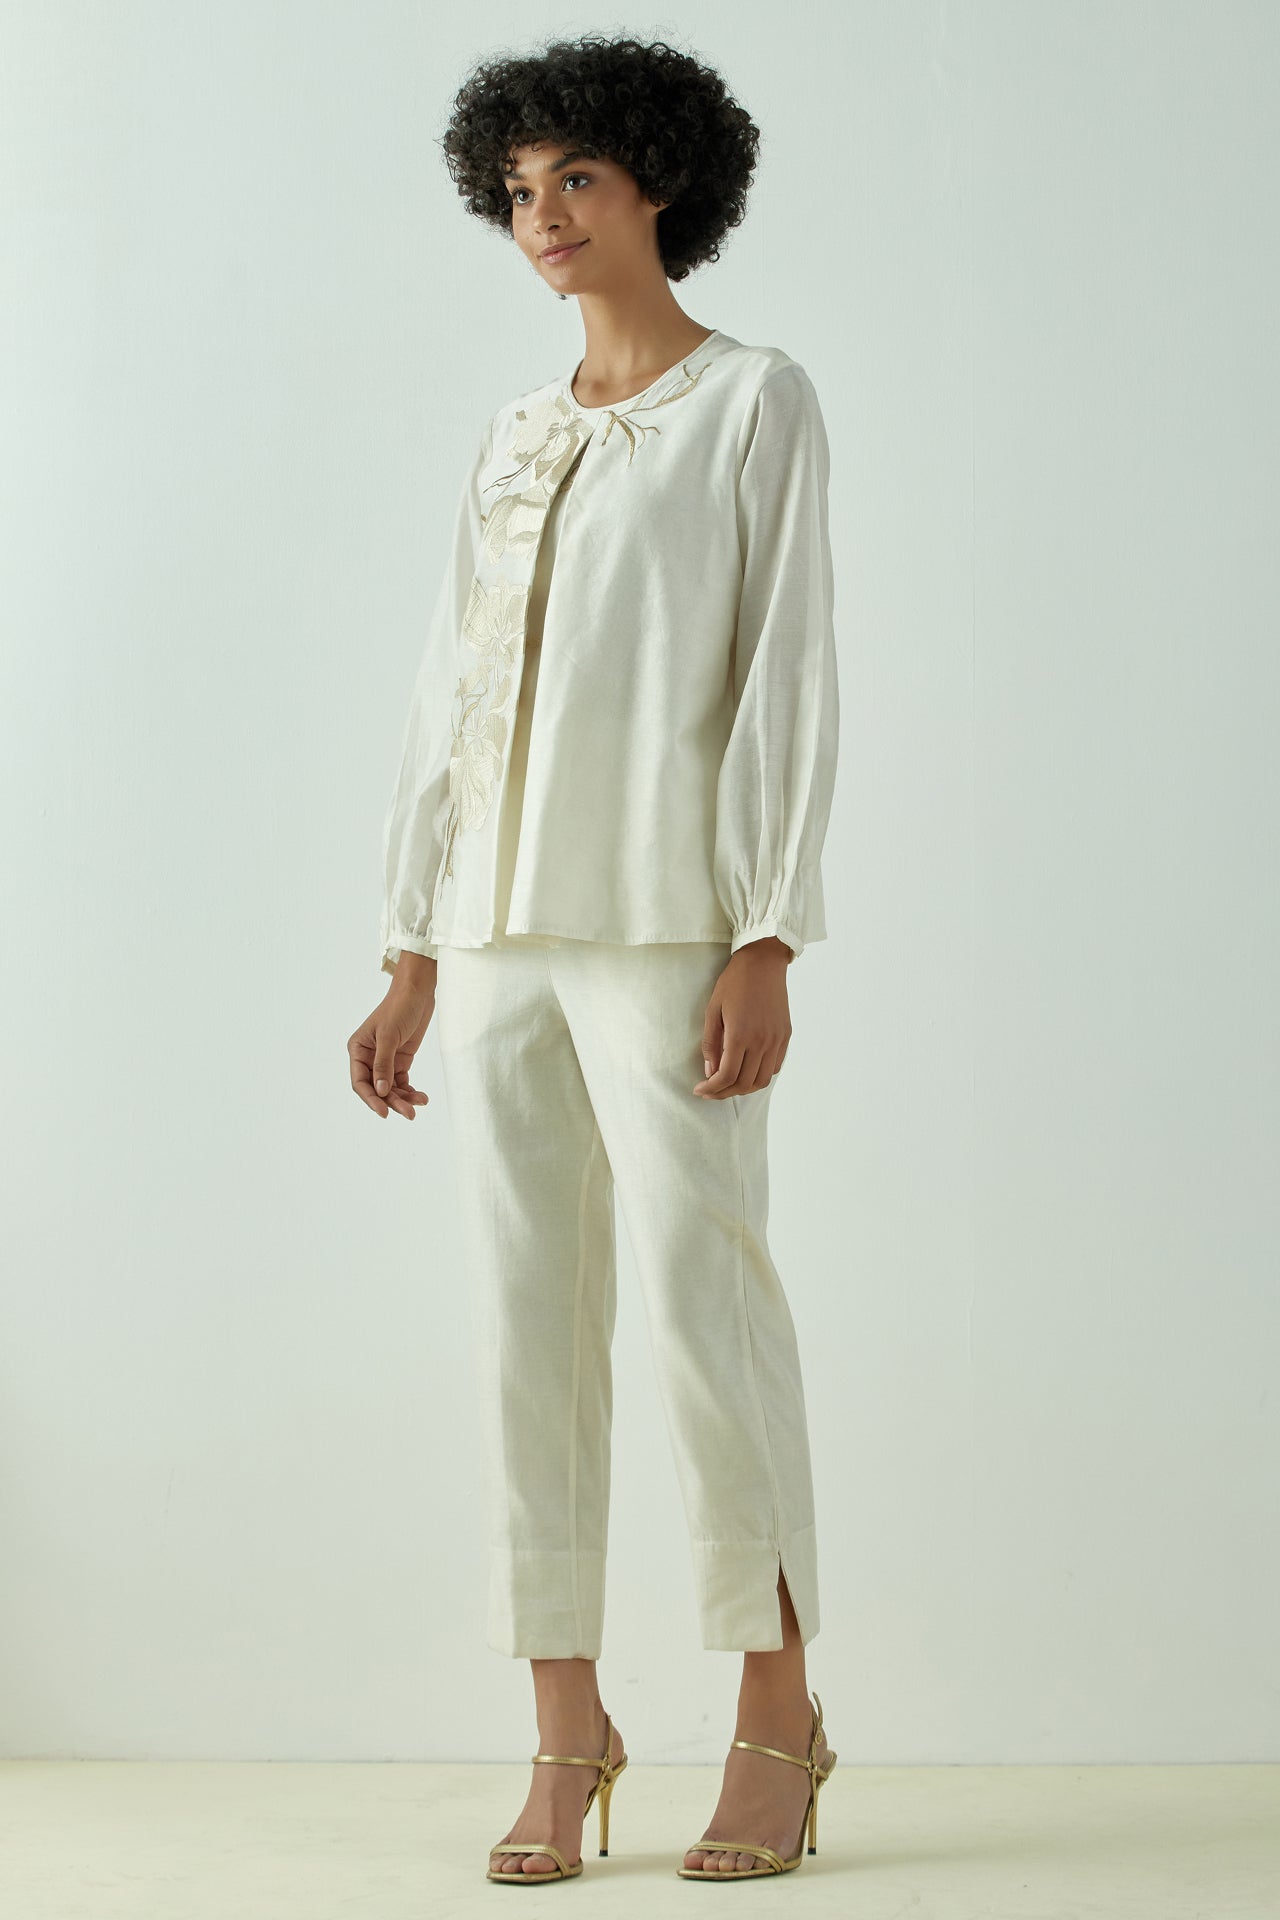 Miriam - Vanilla Demure Top with Ankle Pants